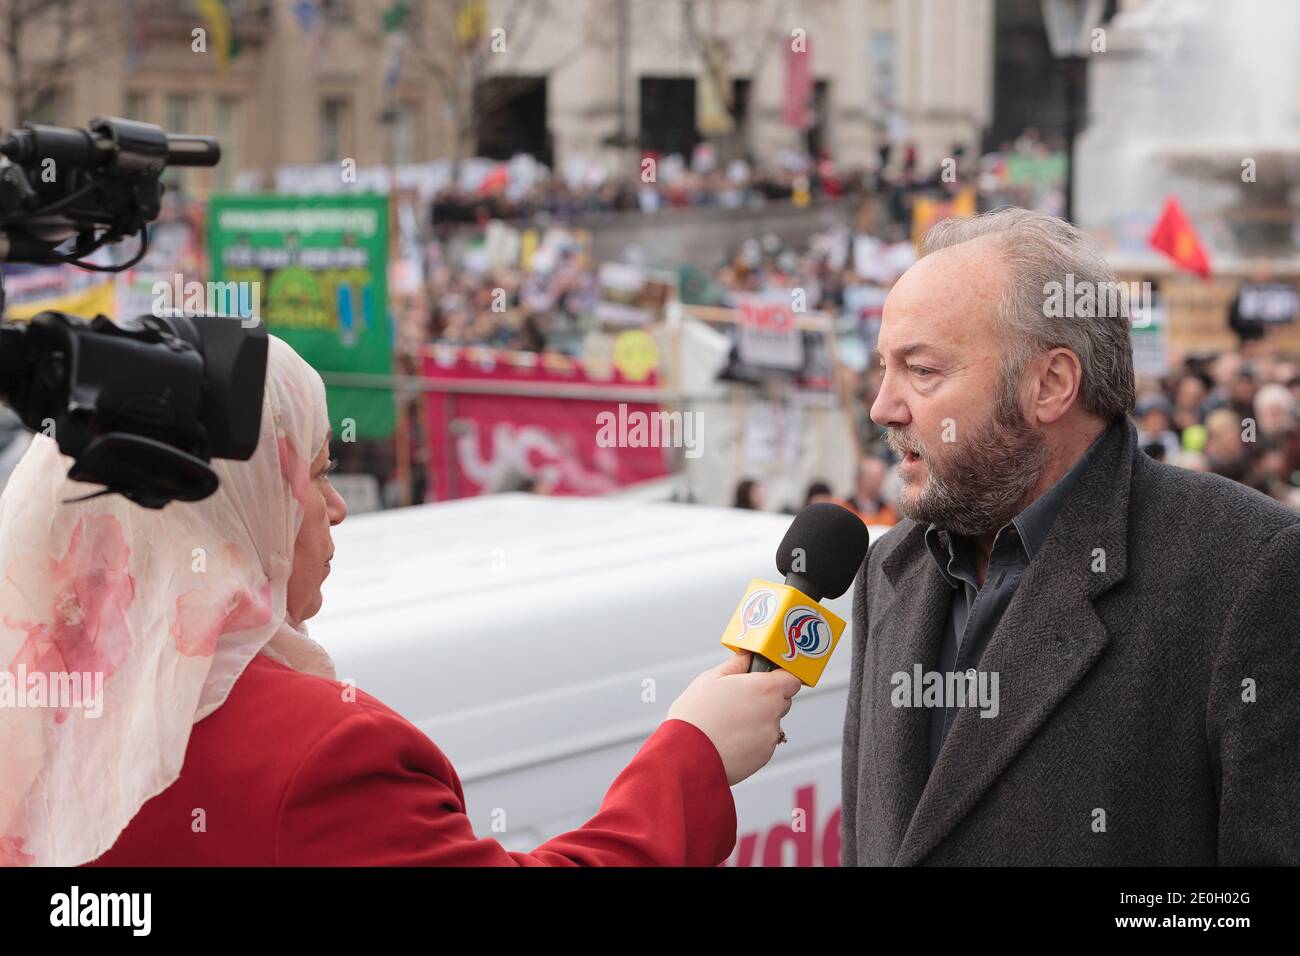 George Galloway being interviewed at an anti war rally Trafalgar Square the culmination of a  march which started at Marble Arch. The protest was  for the removal troops from Iraq and nuclear disarmament. Trafalgar Square, London, UK.  24 Feb 2007 Stock Photo